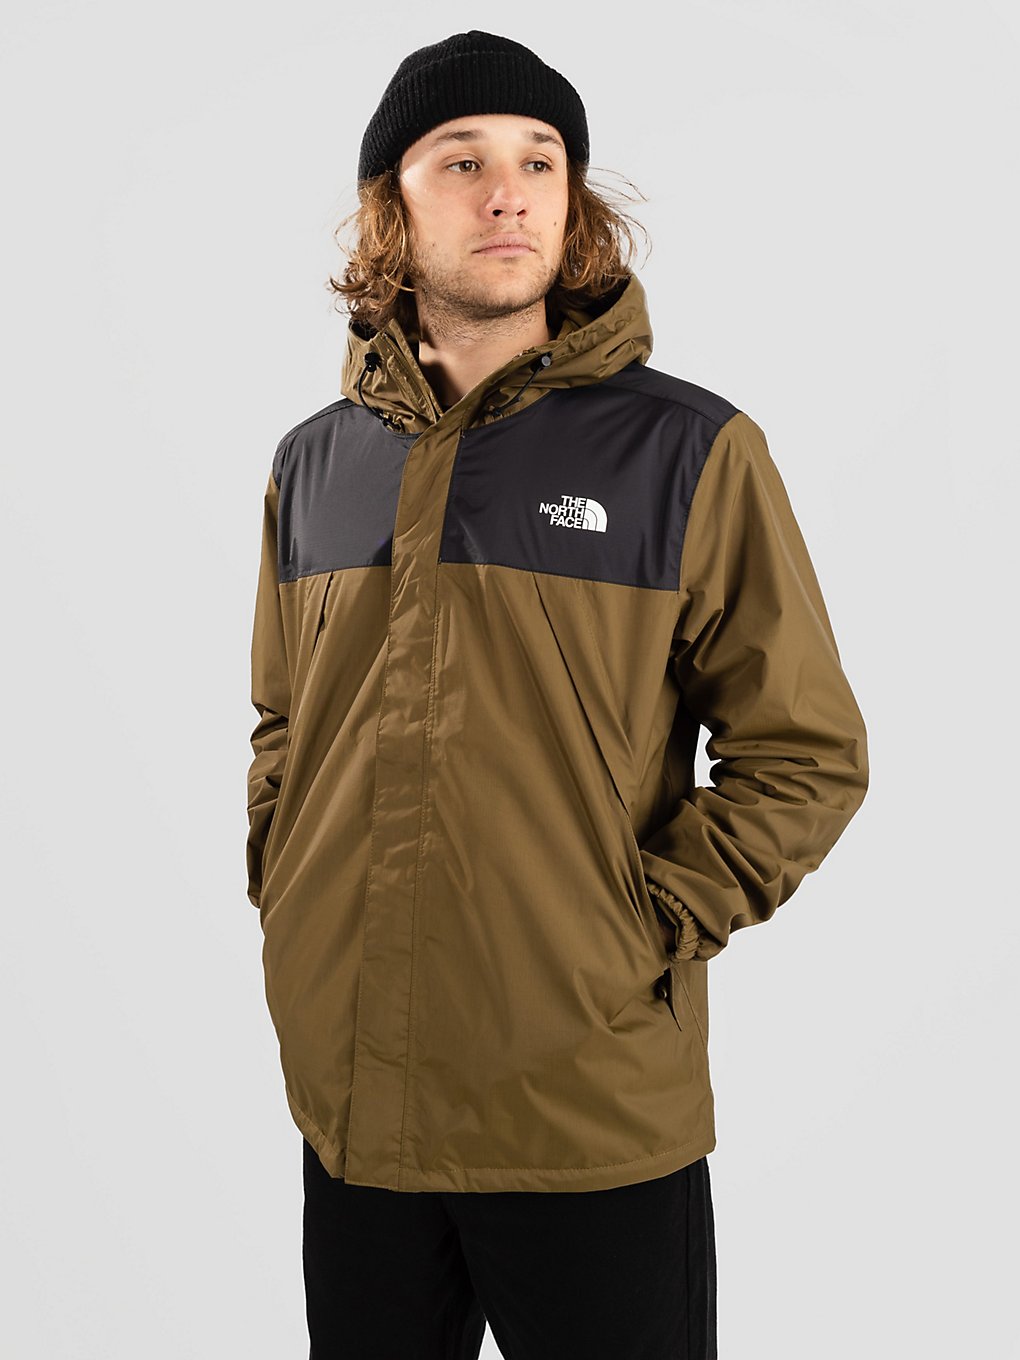 THE NORTH FACE Antora Jacke military olive kaufen